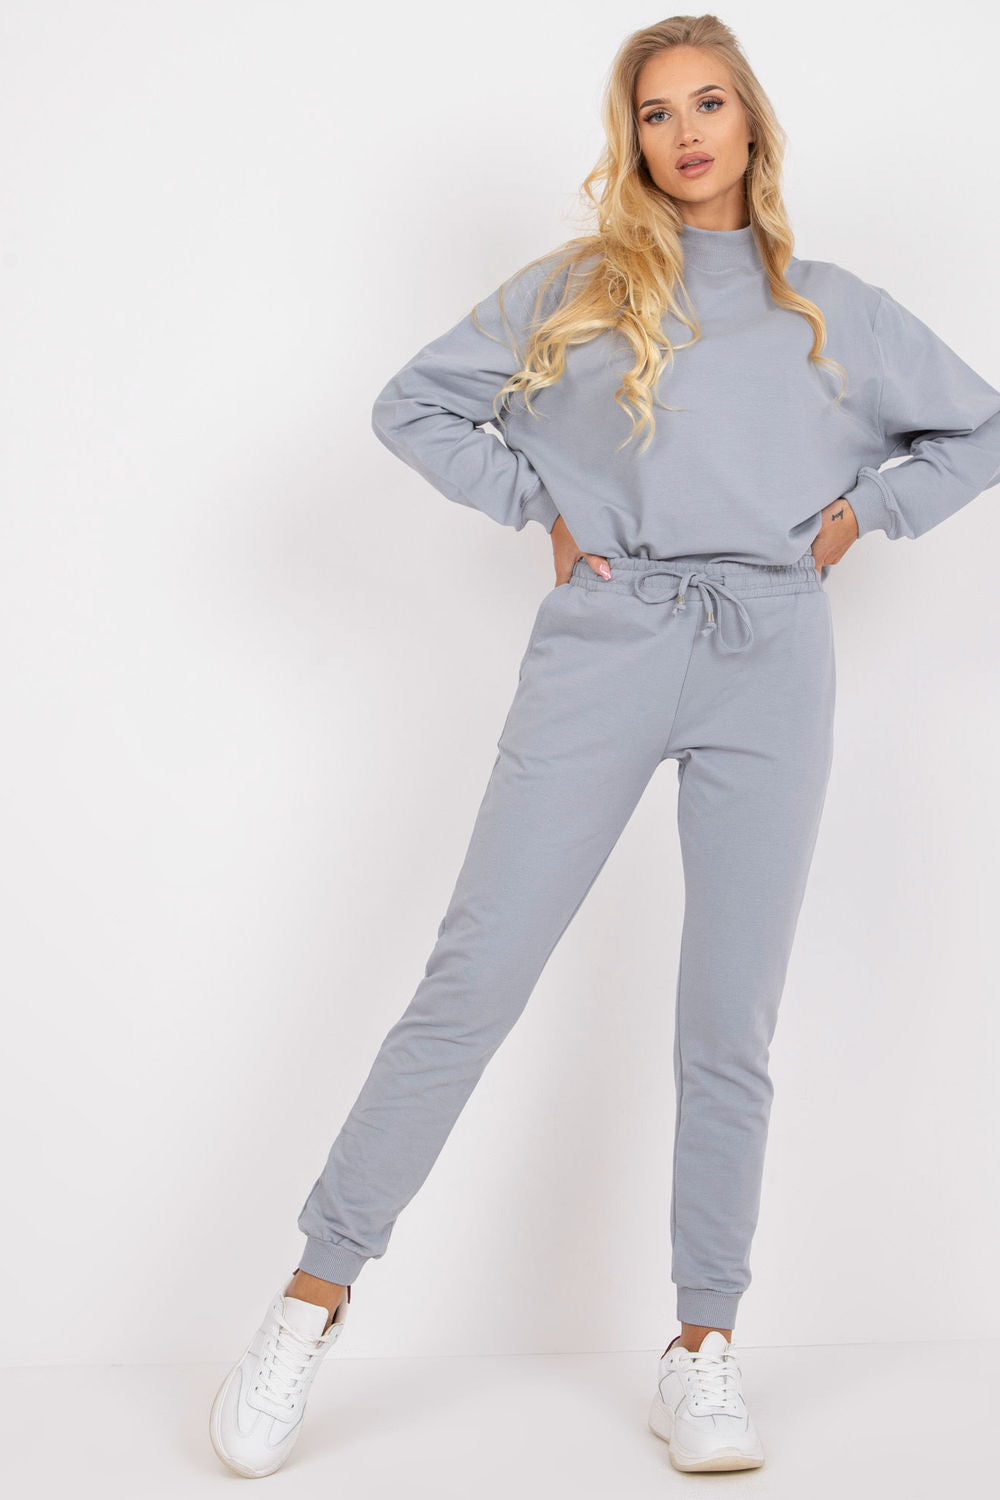 Tracksuit trousers model 167923 Elsy Style Women`s Tracksuit Bottoms, Sports Pants